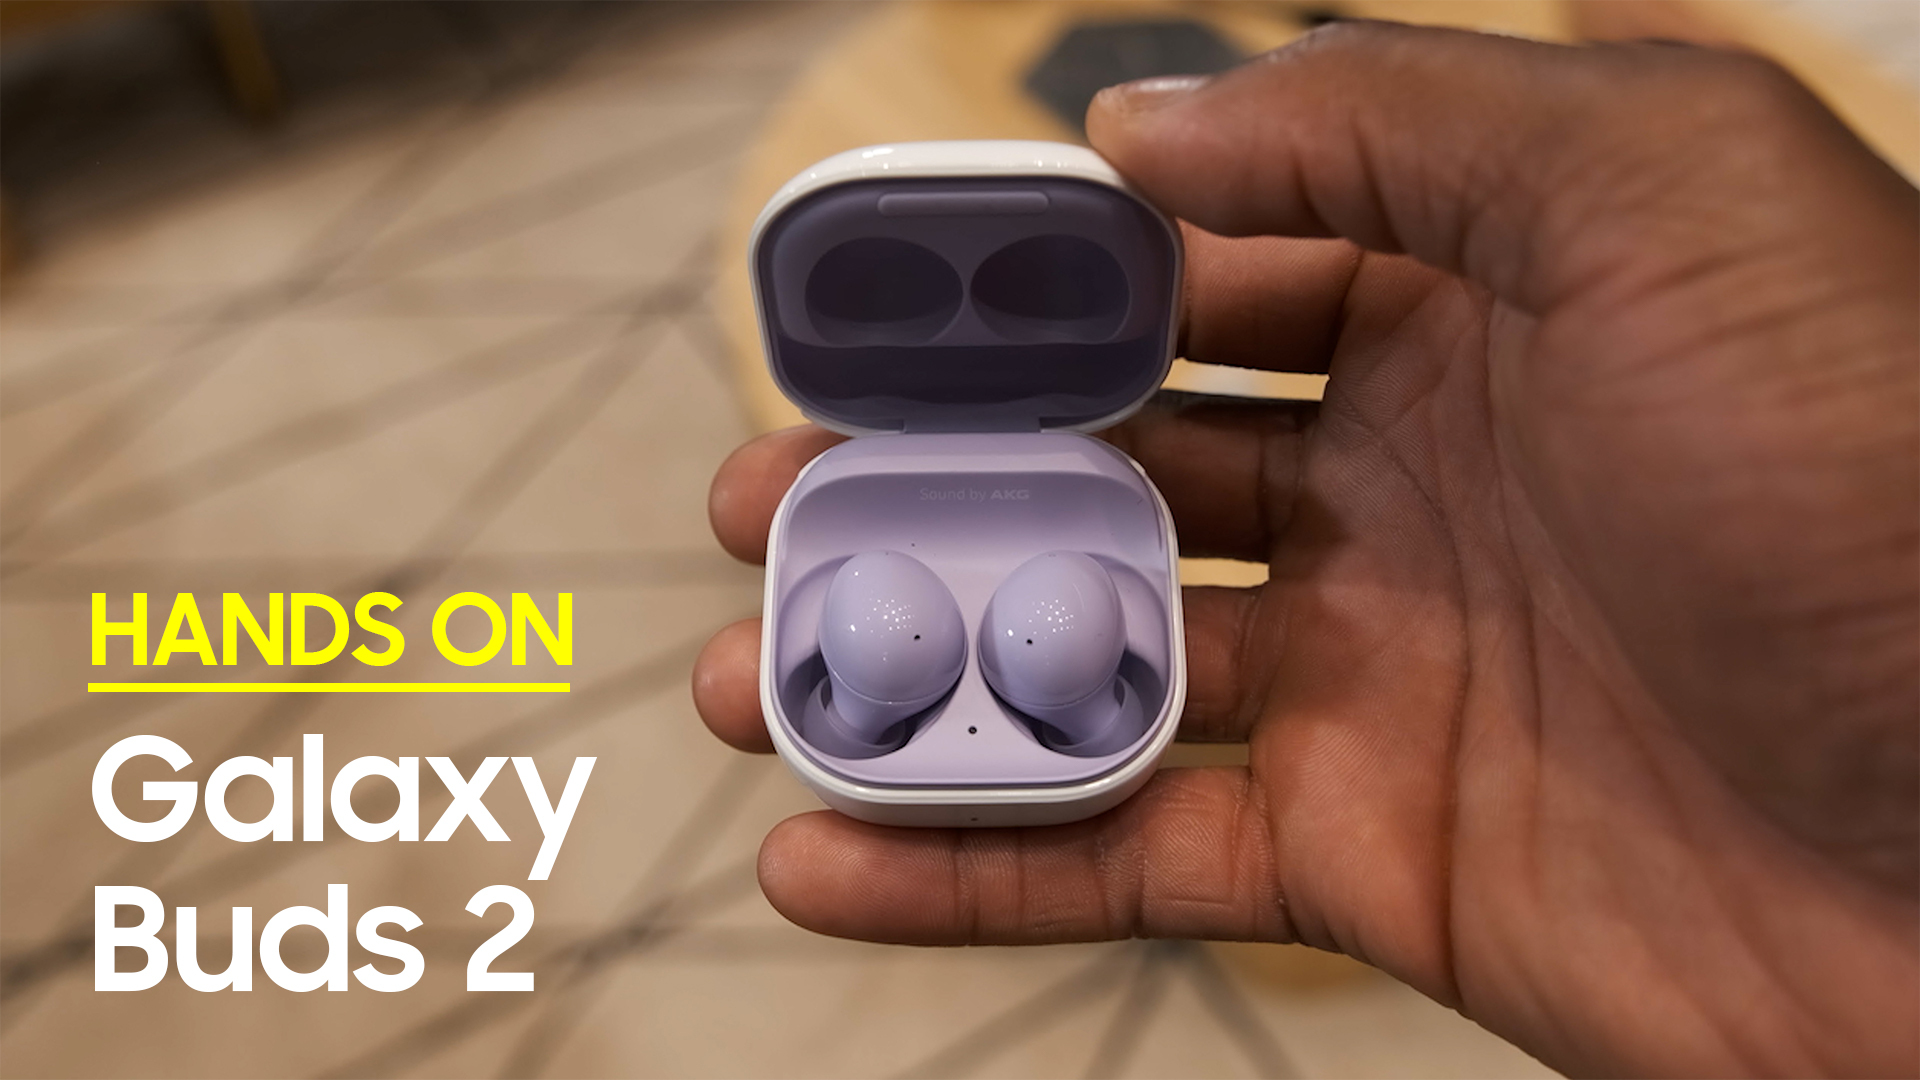 Samsung Galaxy Buds 2 hands-on: What's not to love? - SamMobile